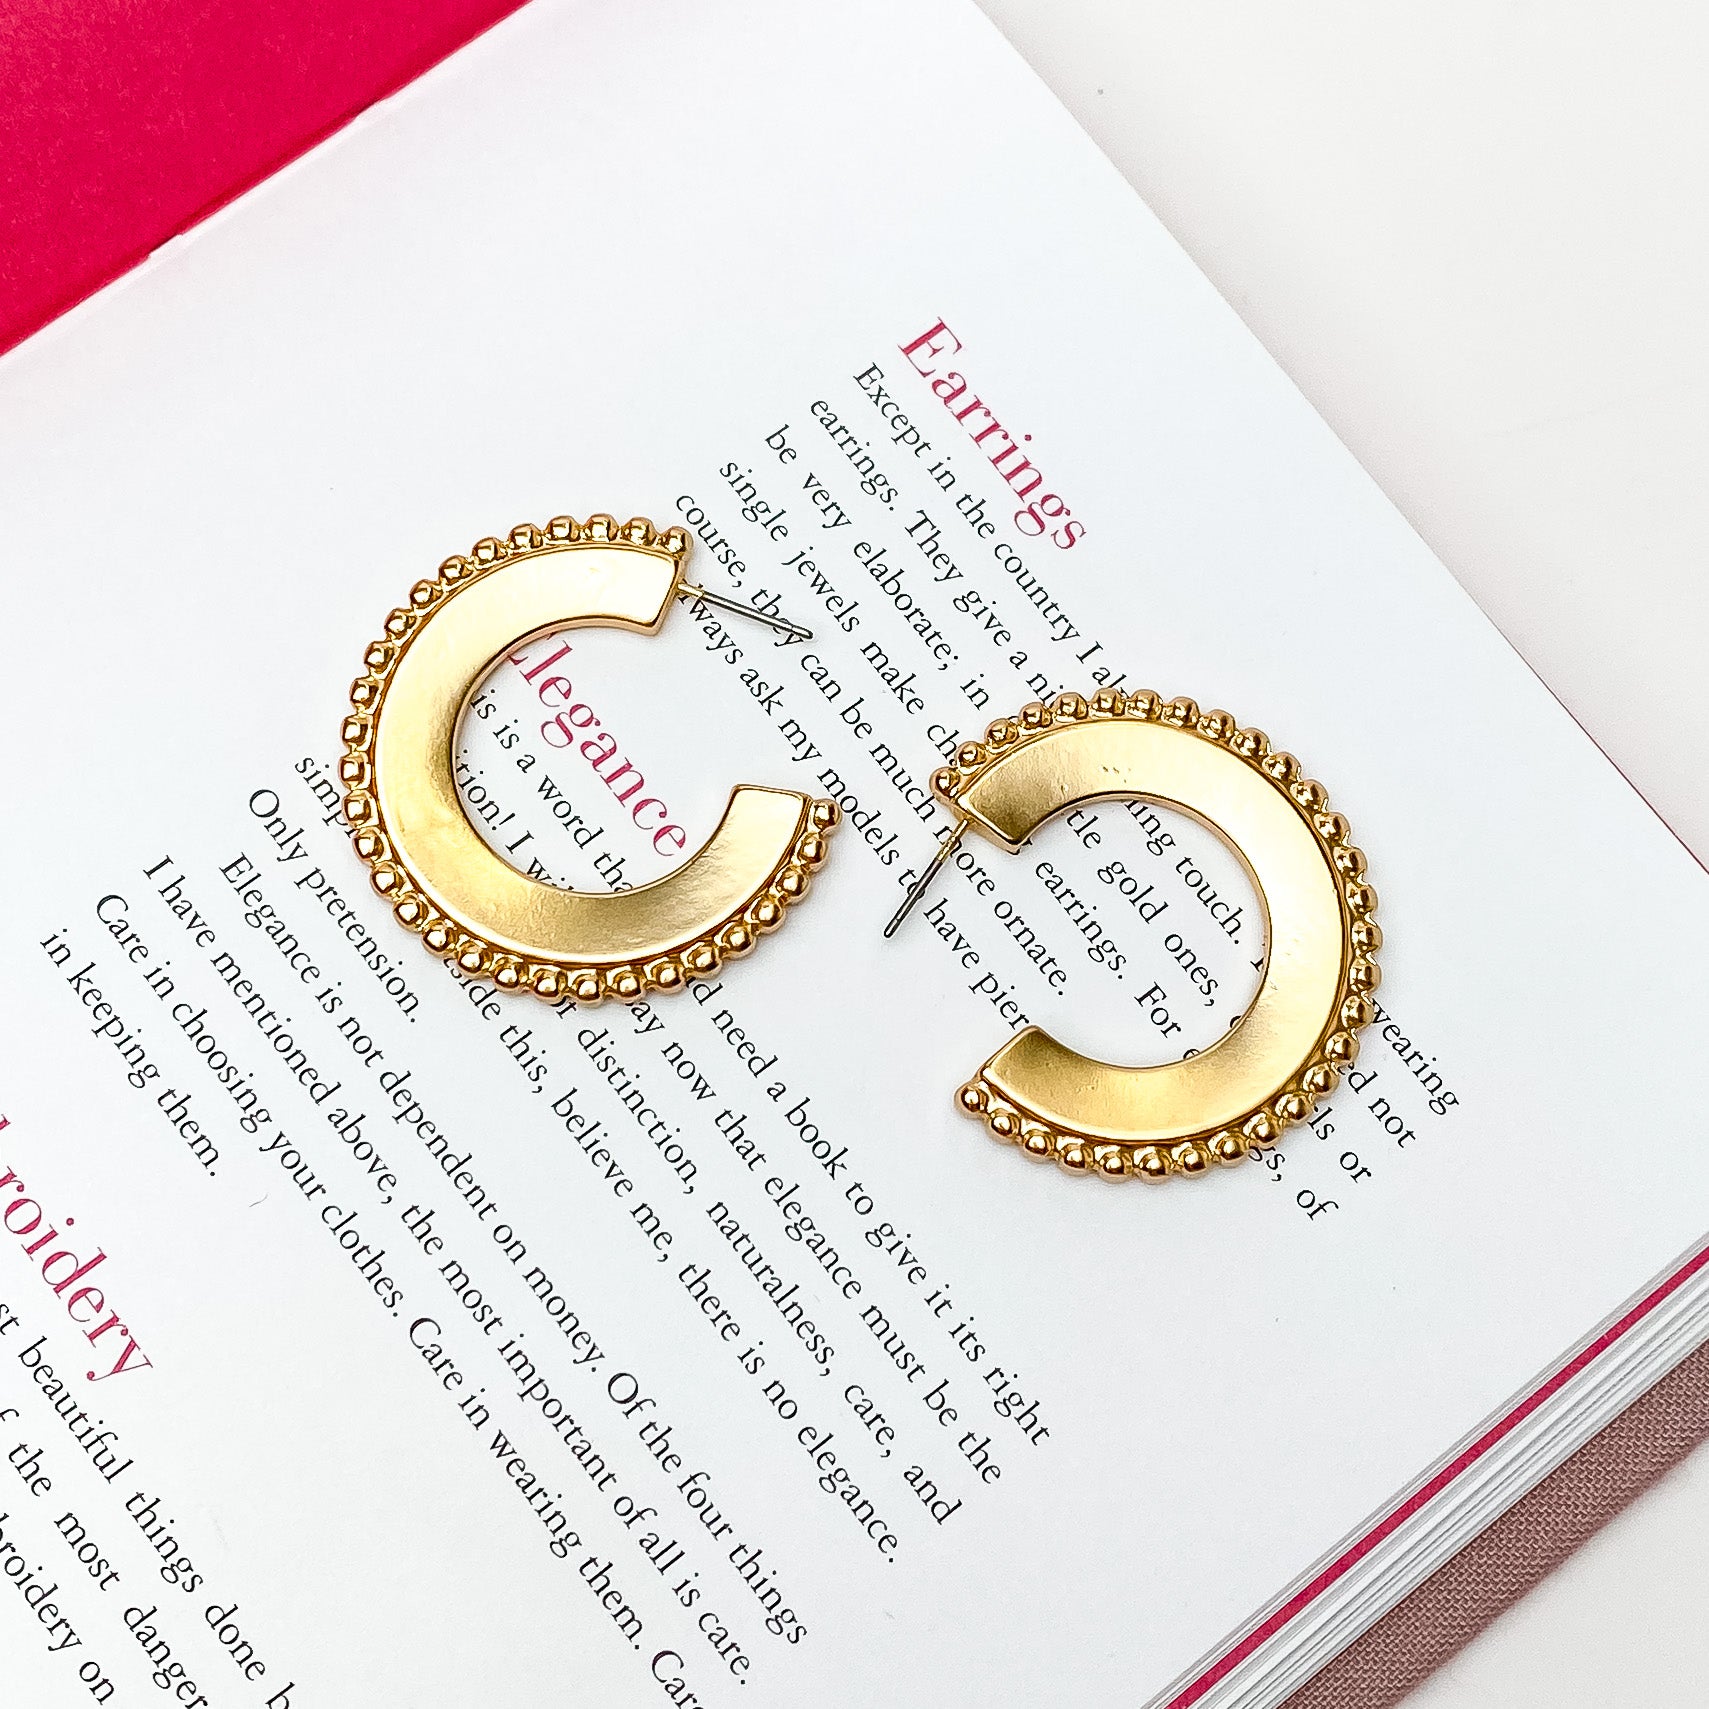 Smooth, gold hoop earrings with a beaded edge. These earrings are pictured on an open book on a white background. 